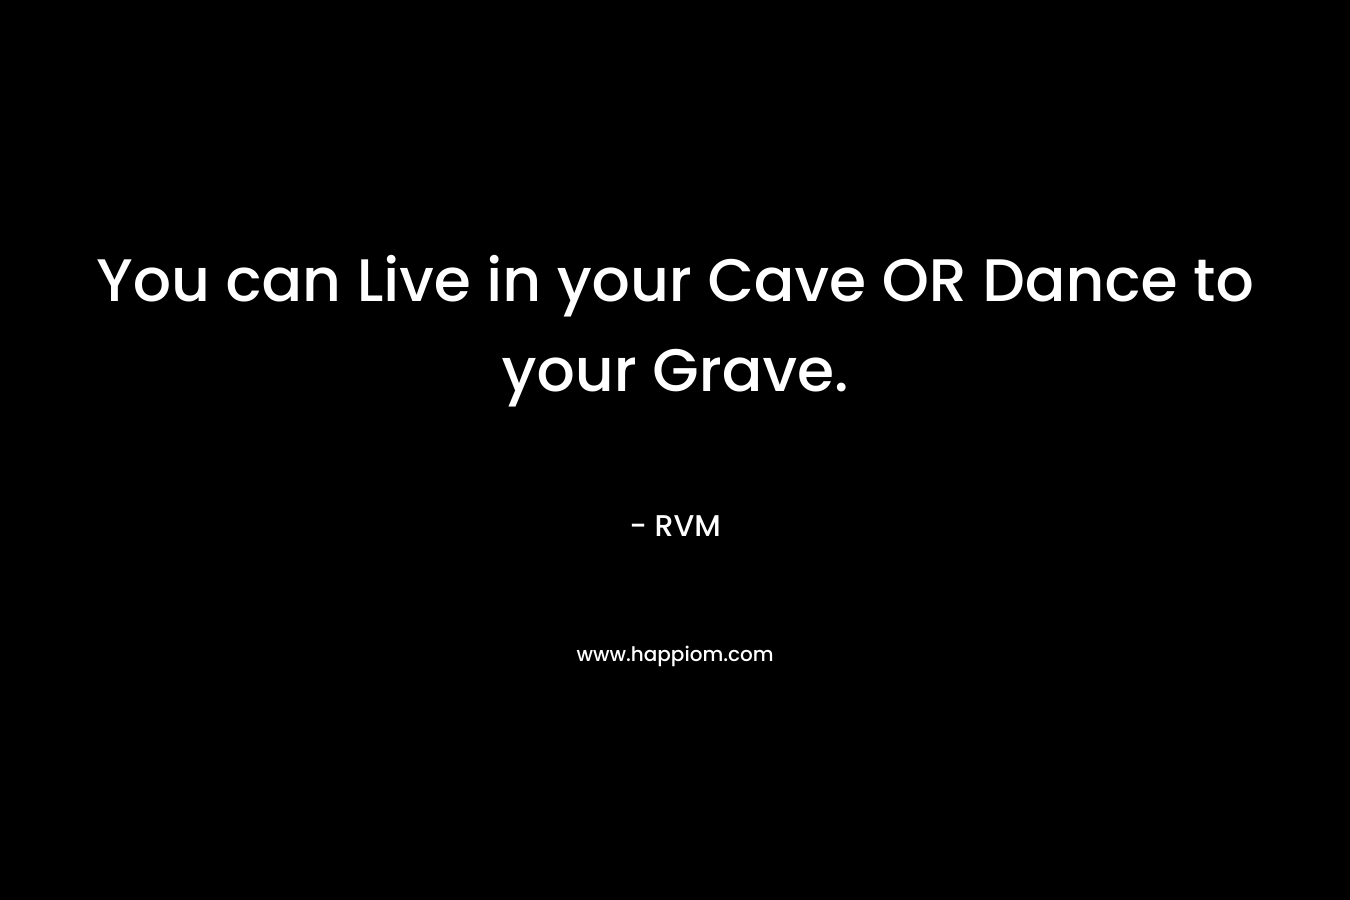 You can Live in your Cave OR Dance to your Grave.